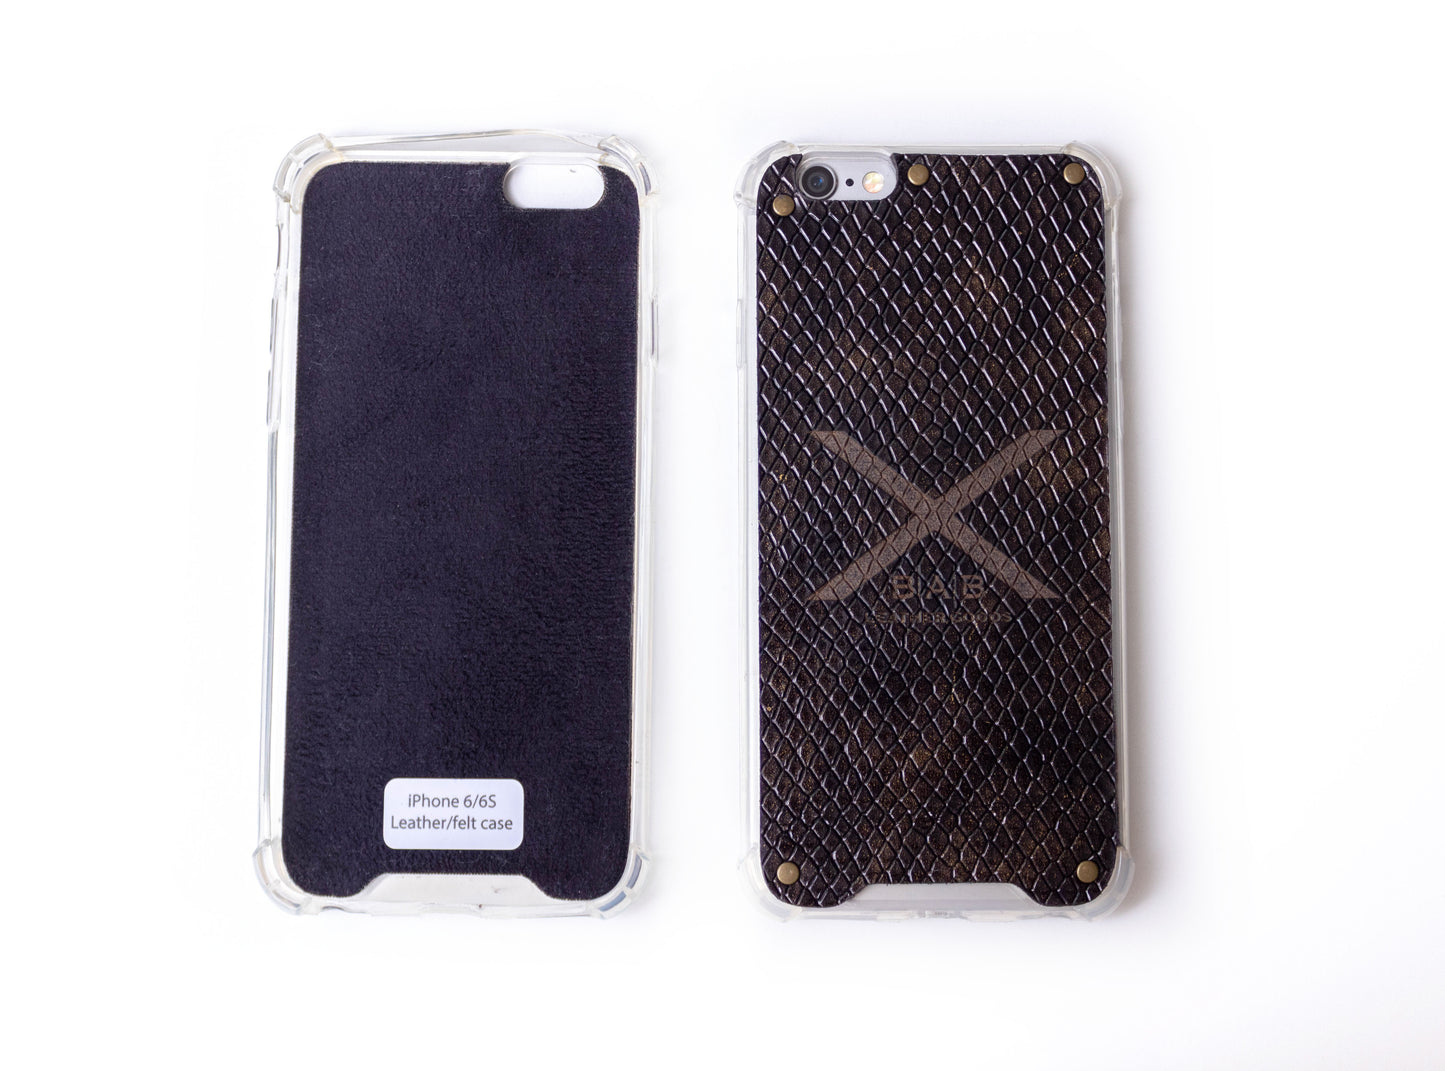 Textured Gold Python Patent Genuine Leather iPhone Case cut and laser engraved, 5 Bronze Rivets.- F36